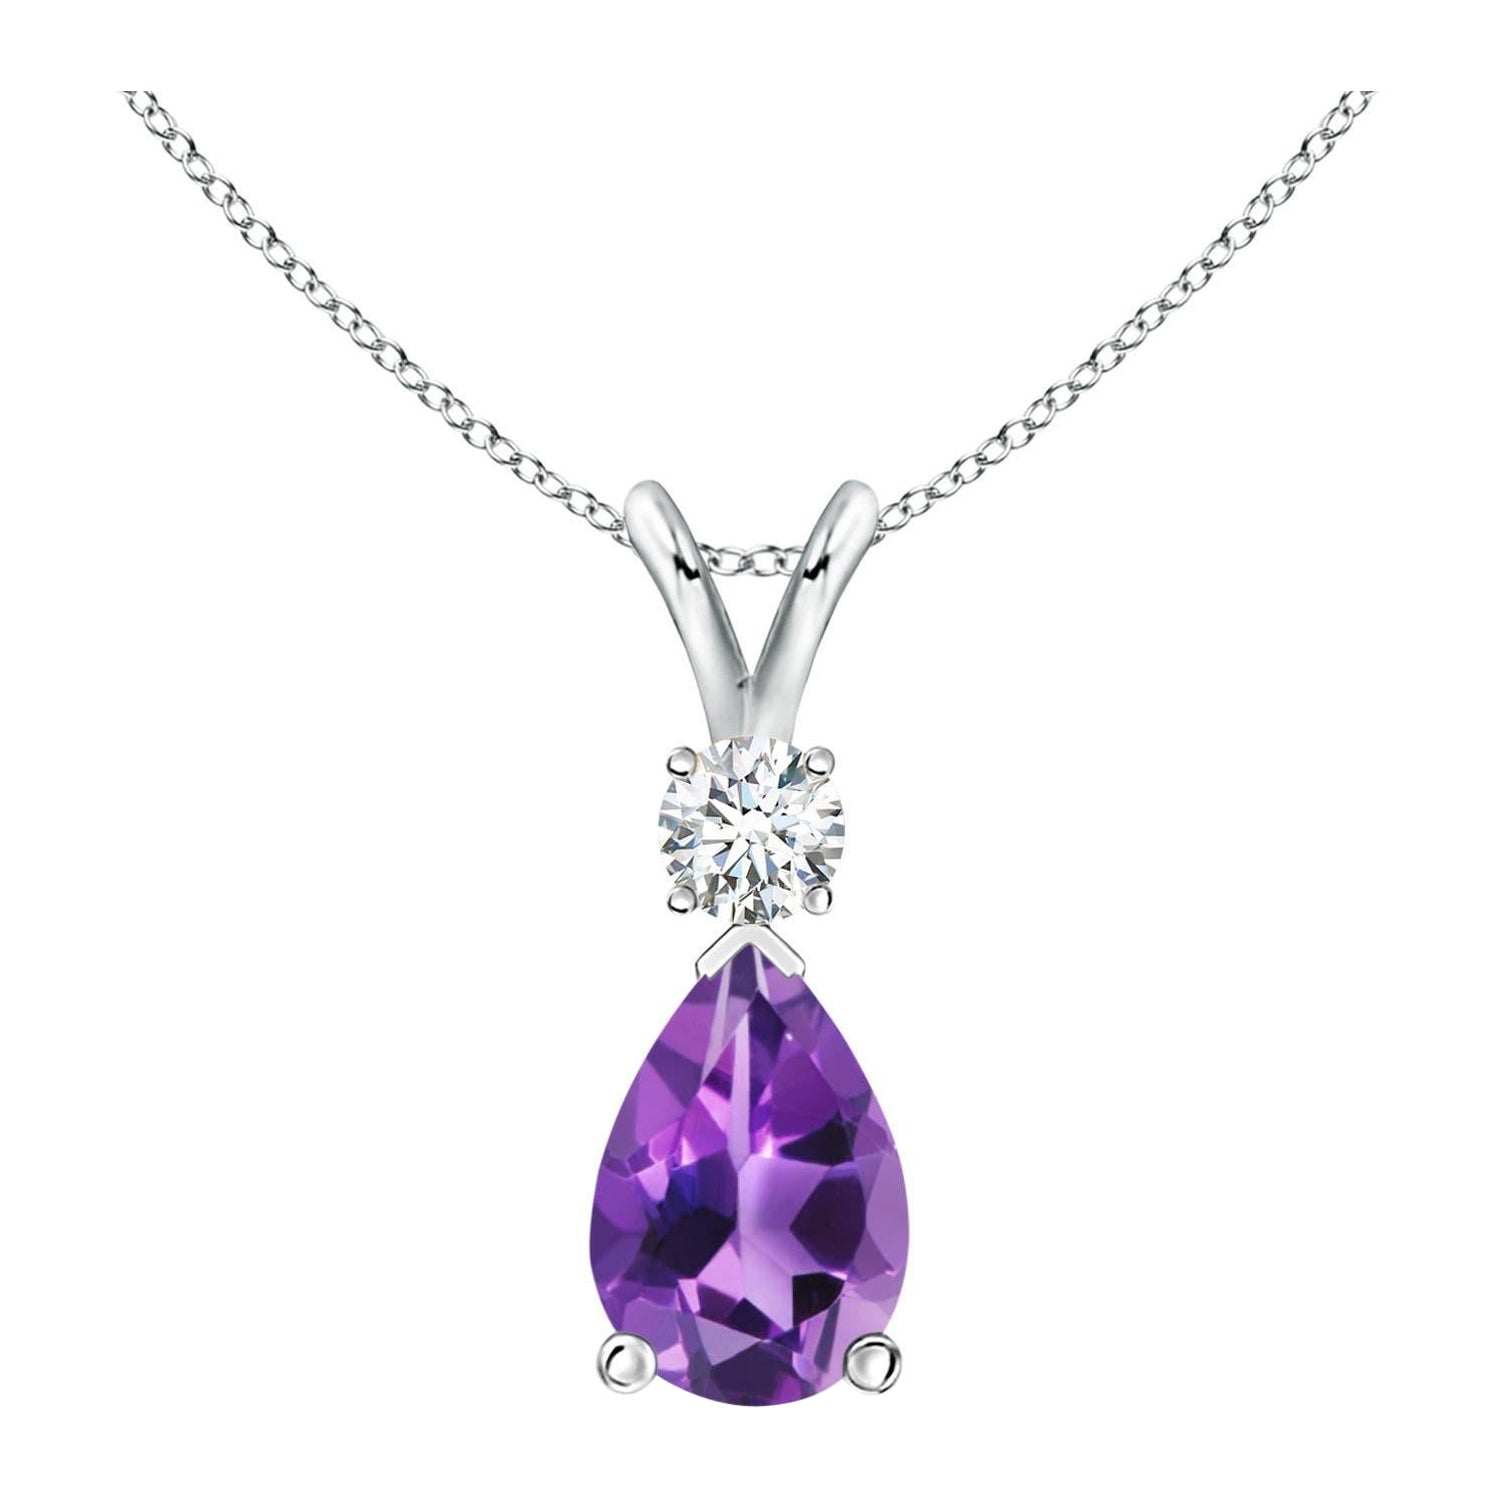 Natural 1.6 ct Amethyst Teardrop Pendant with Diamond in 925 Sterling Silver